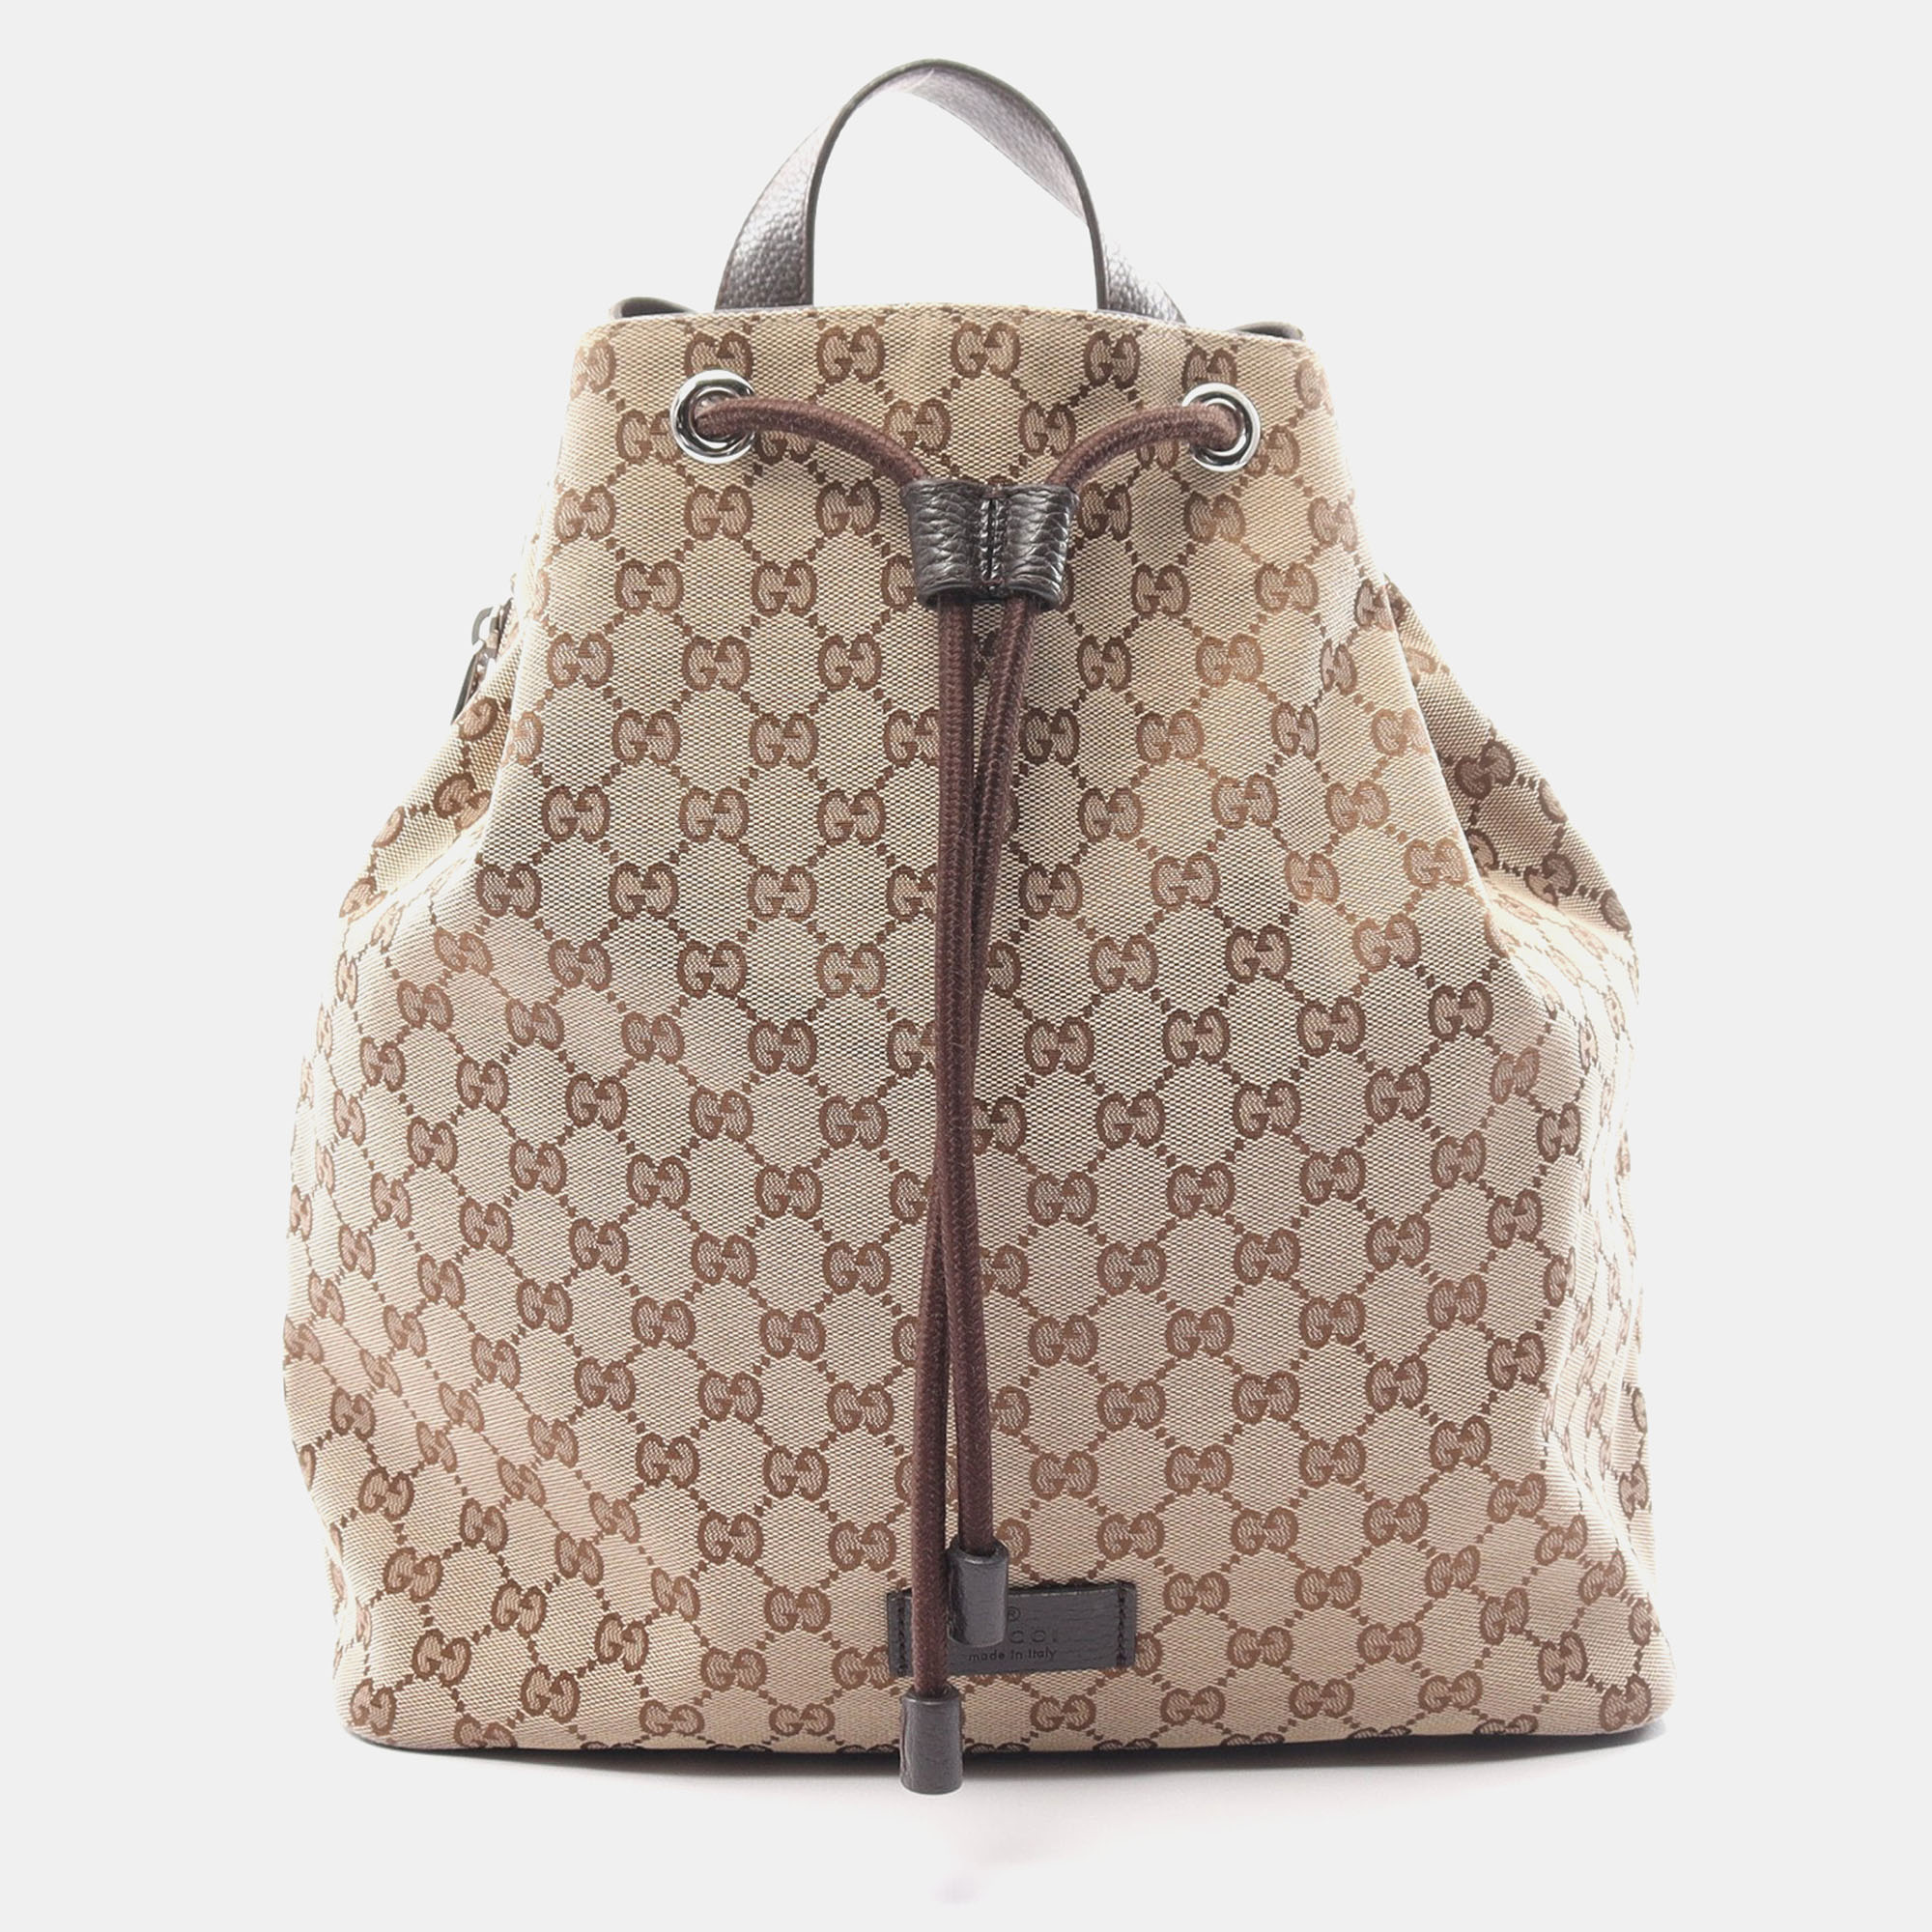 Pre-owned Gucci Gg Canvas Backpack Rucksack Canvas Leather Beige Dark Brown